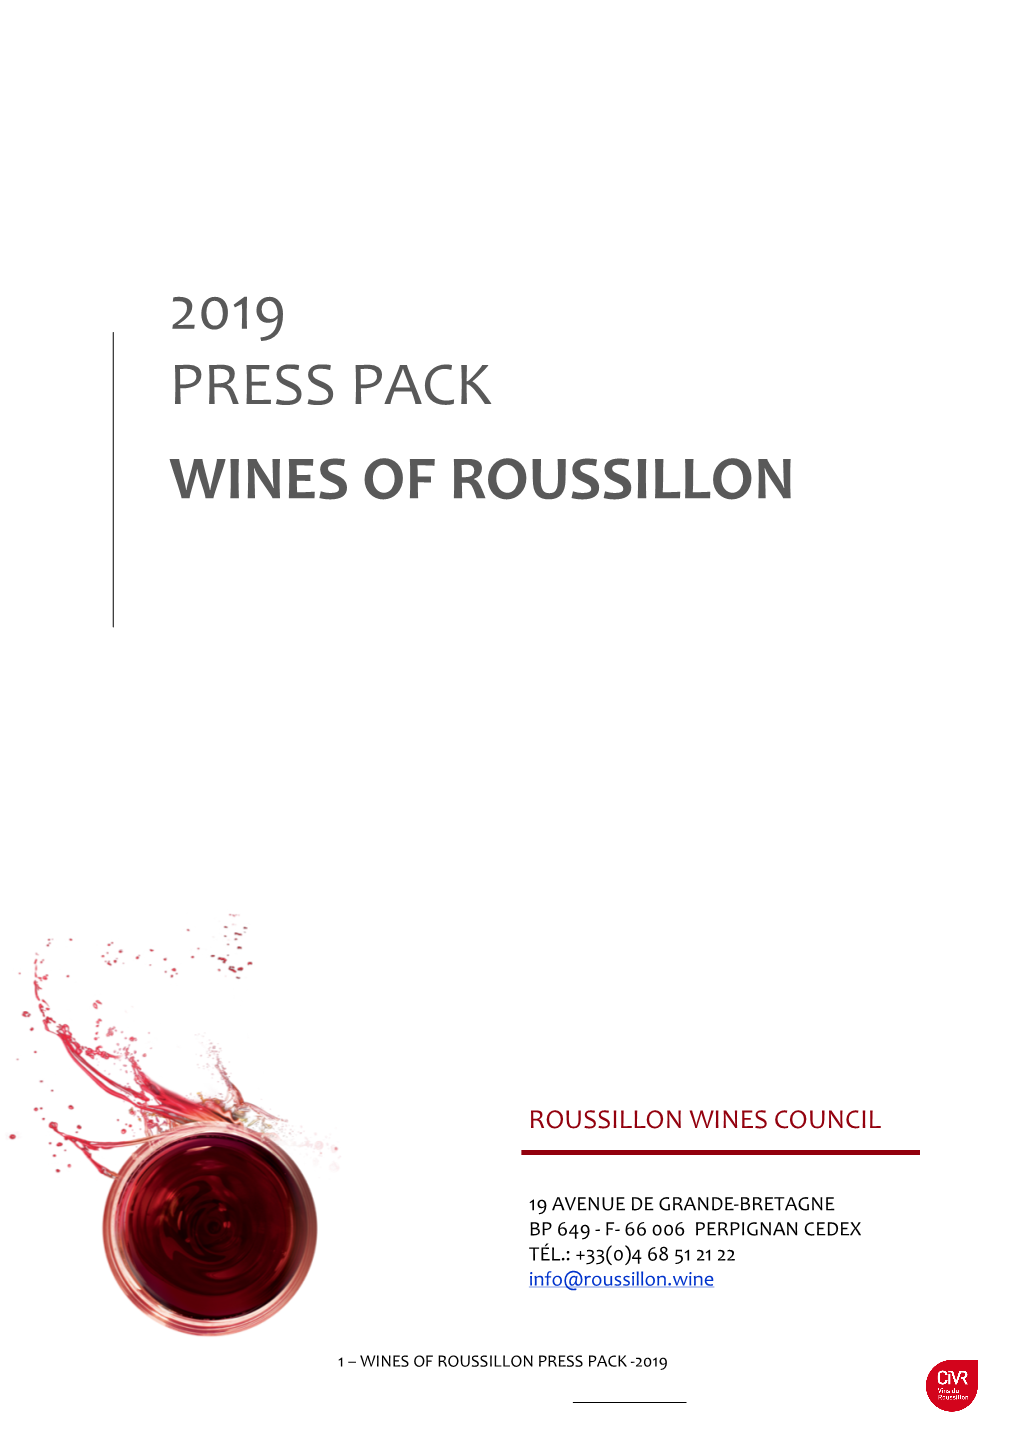 2019 Press Pack Wines of Roussillon